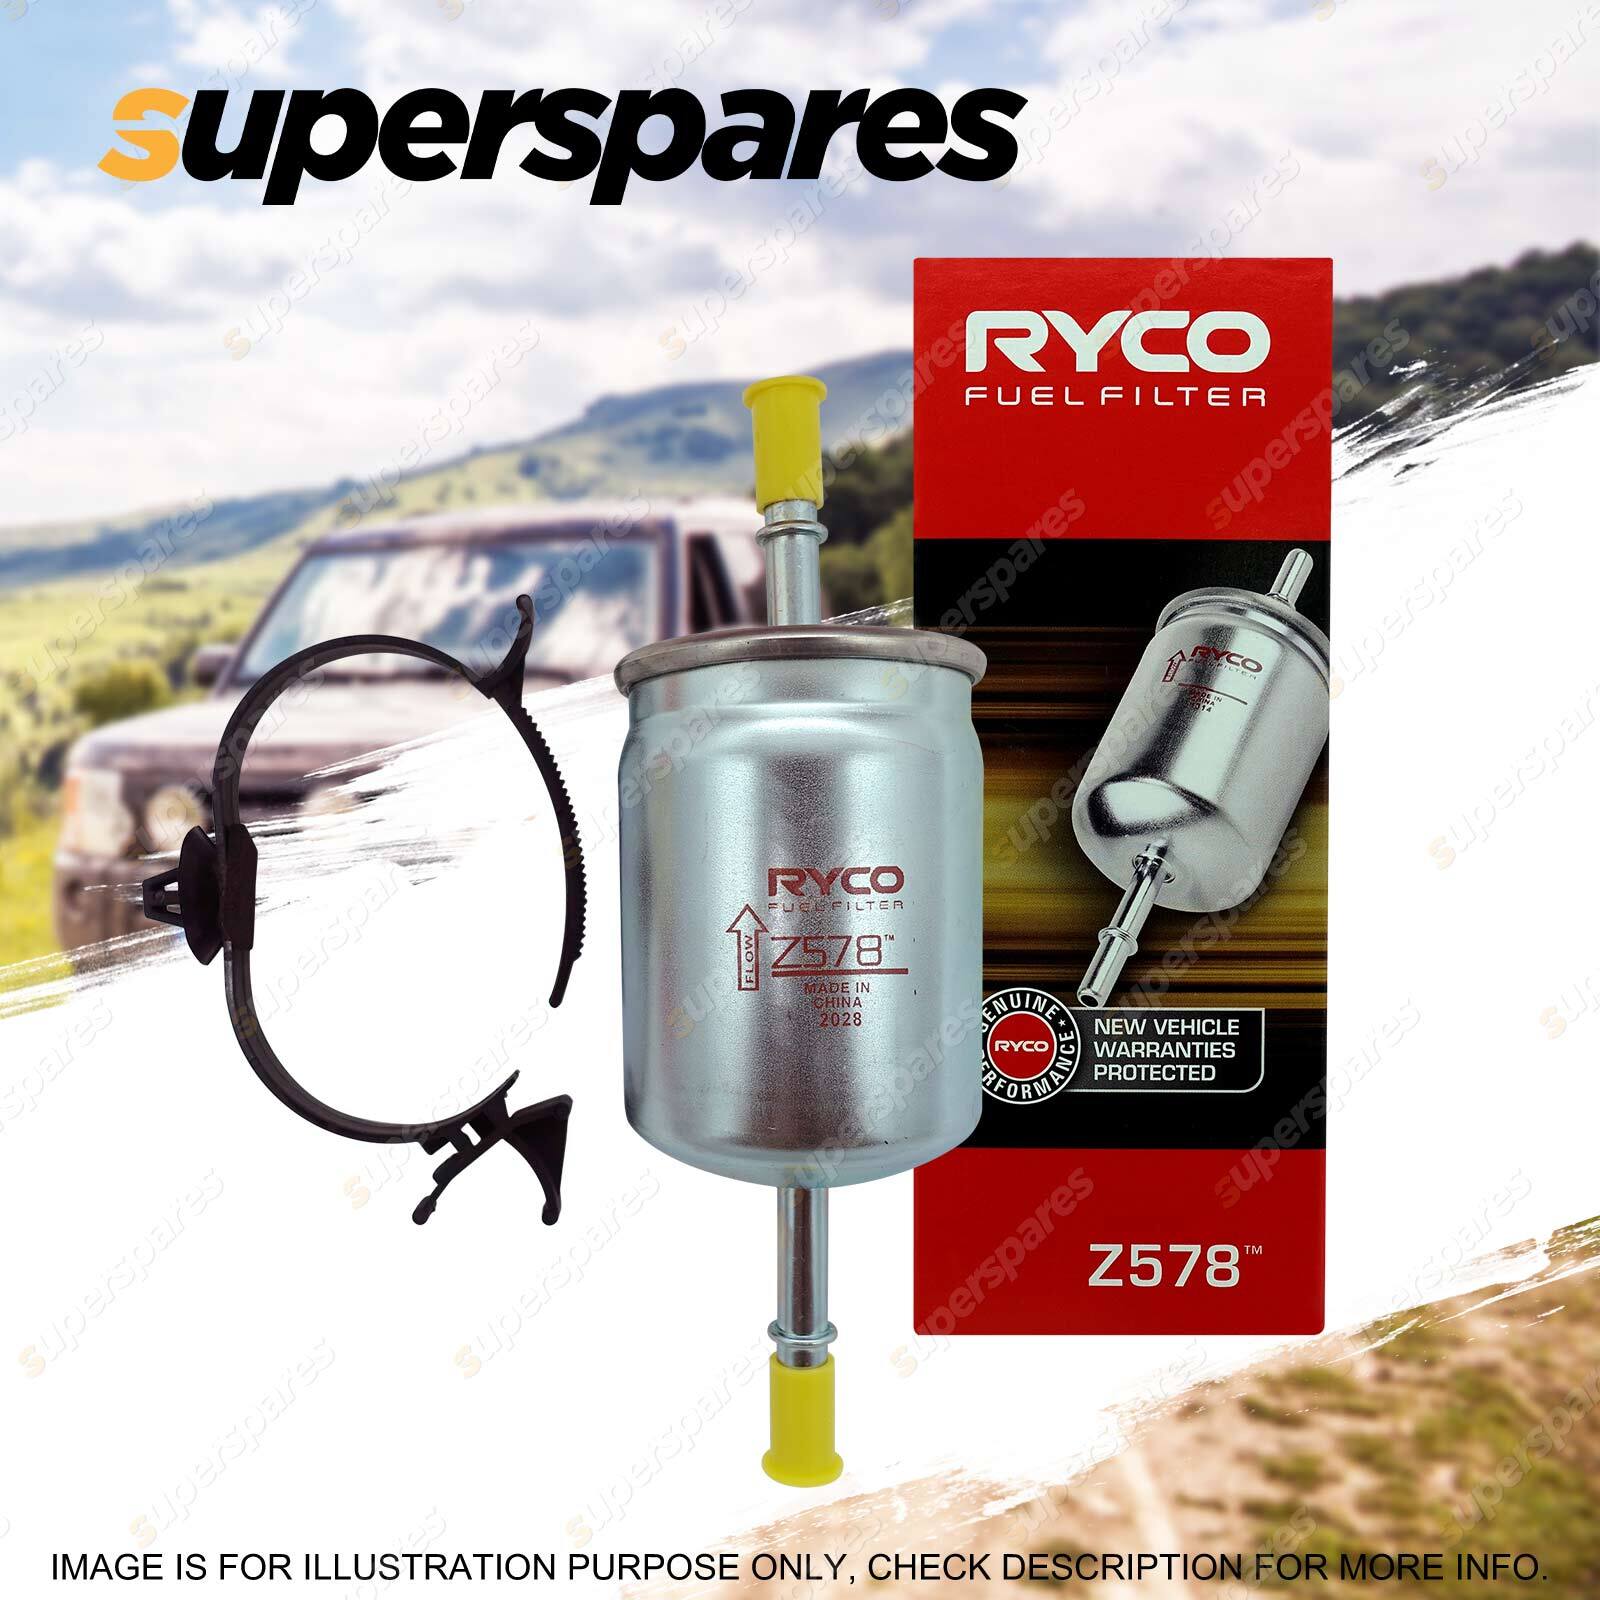 Z168 Ryco Fuel Filter FOR HOLDEN COMMODORE VL 